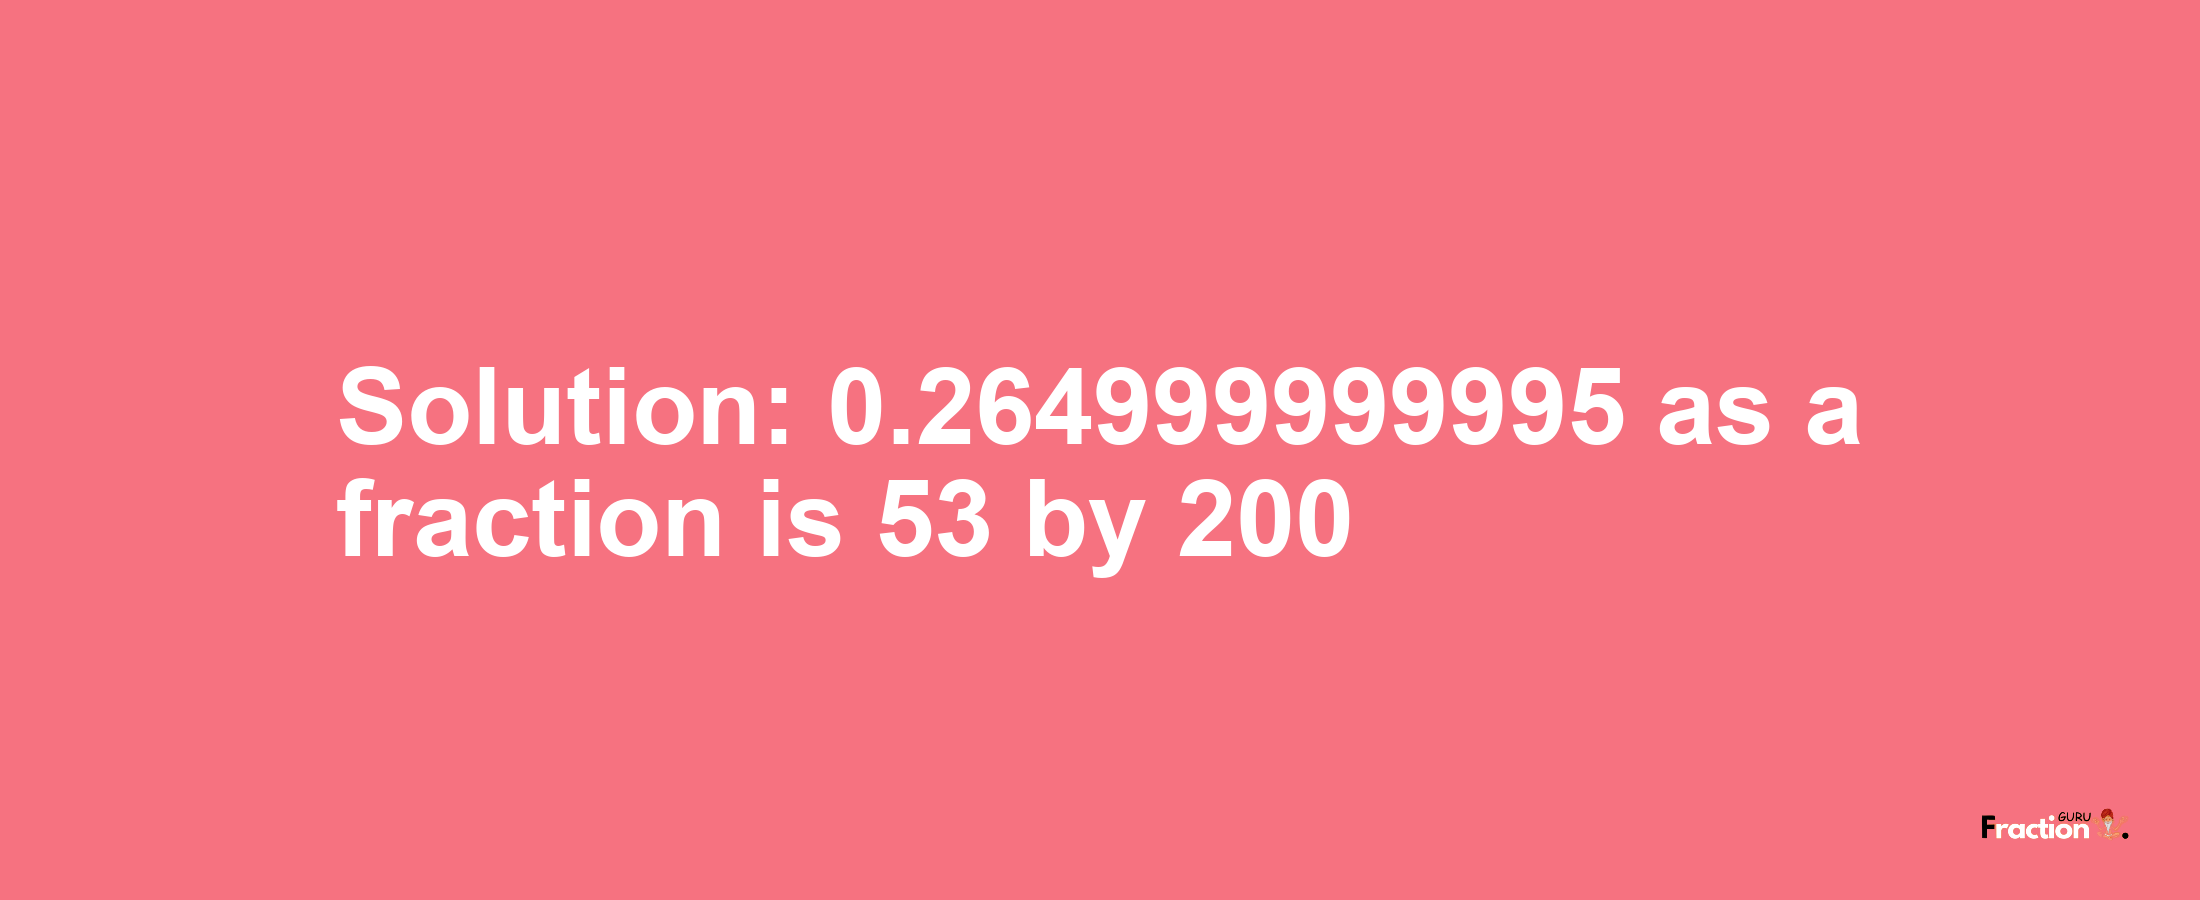 Solution:0.264999999995 as a fraction is 53/200